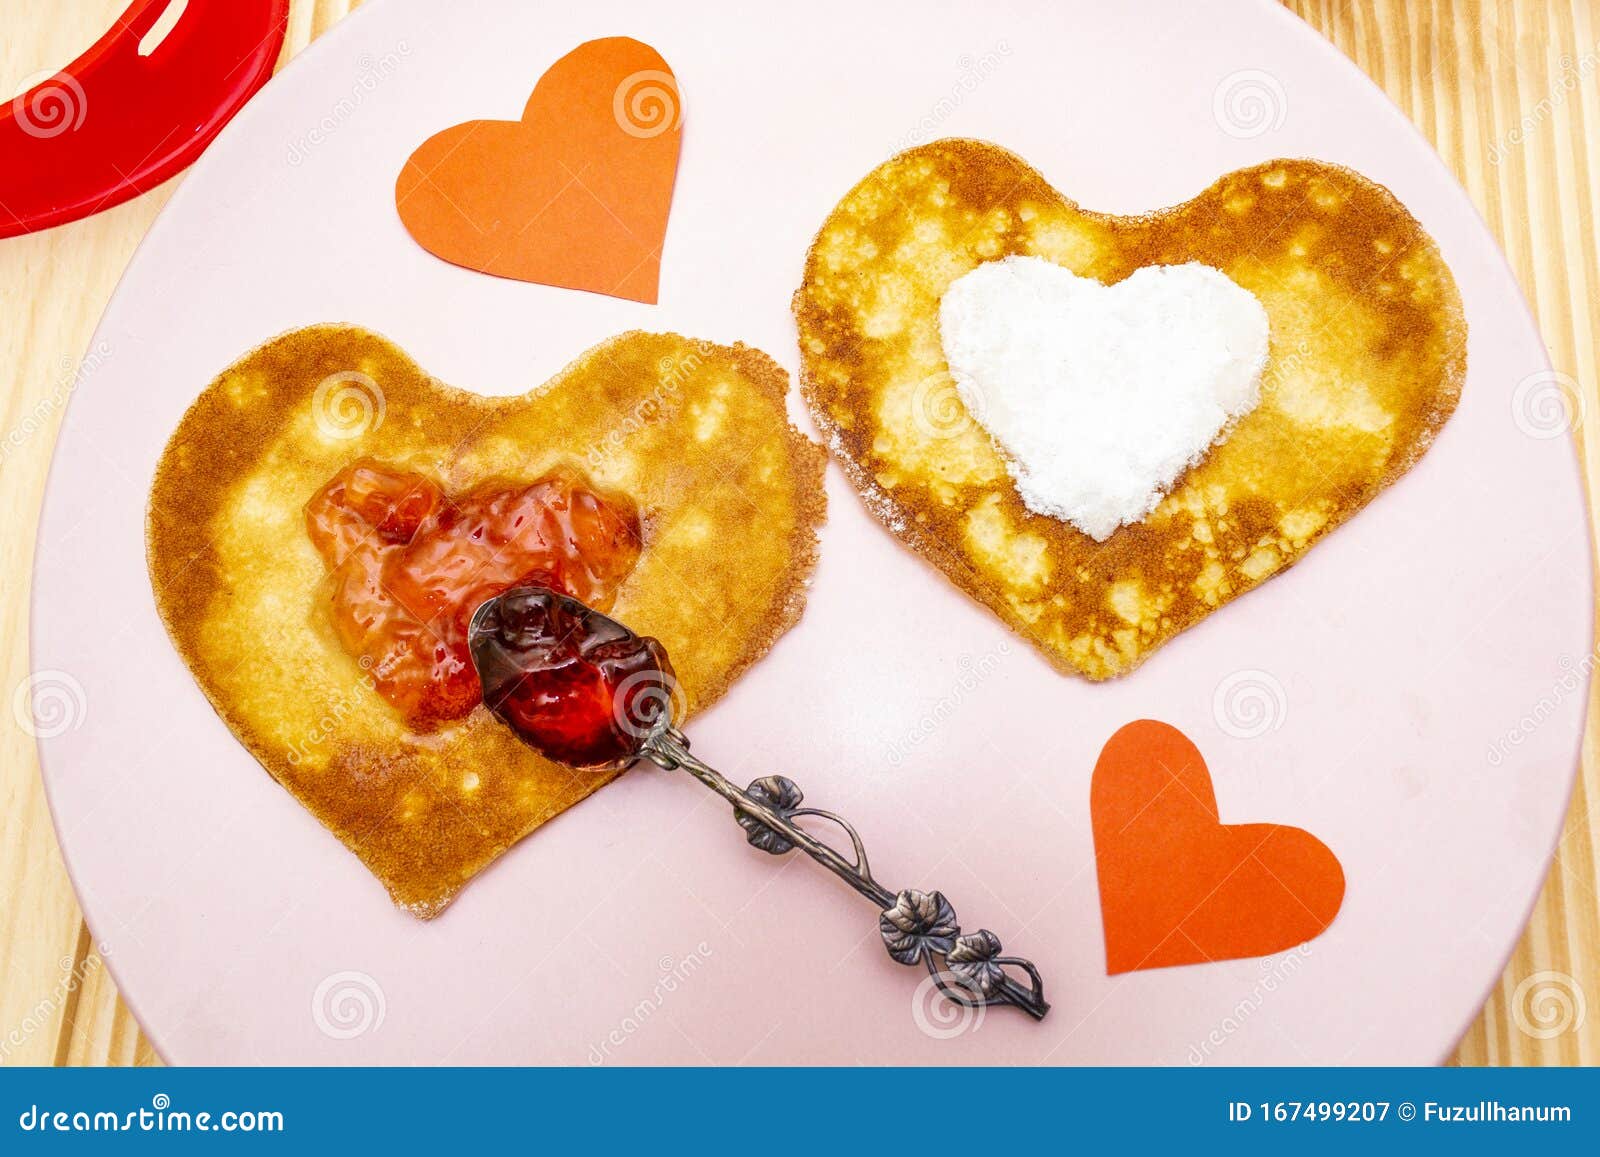 Heart Shaped Pancakes for Romantic Breakfast with Strawberry Jam ...